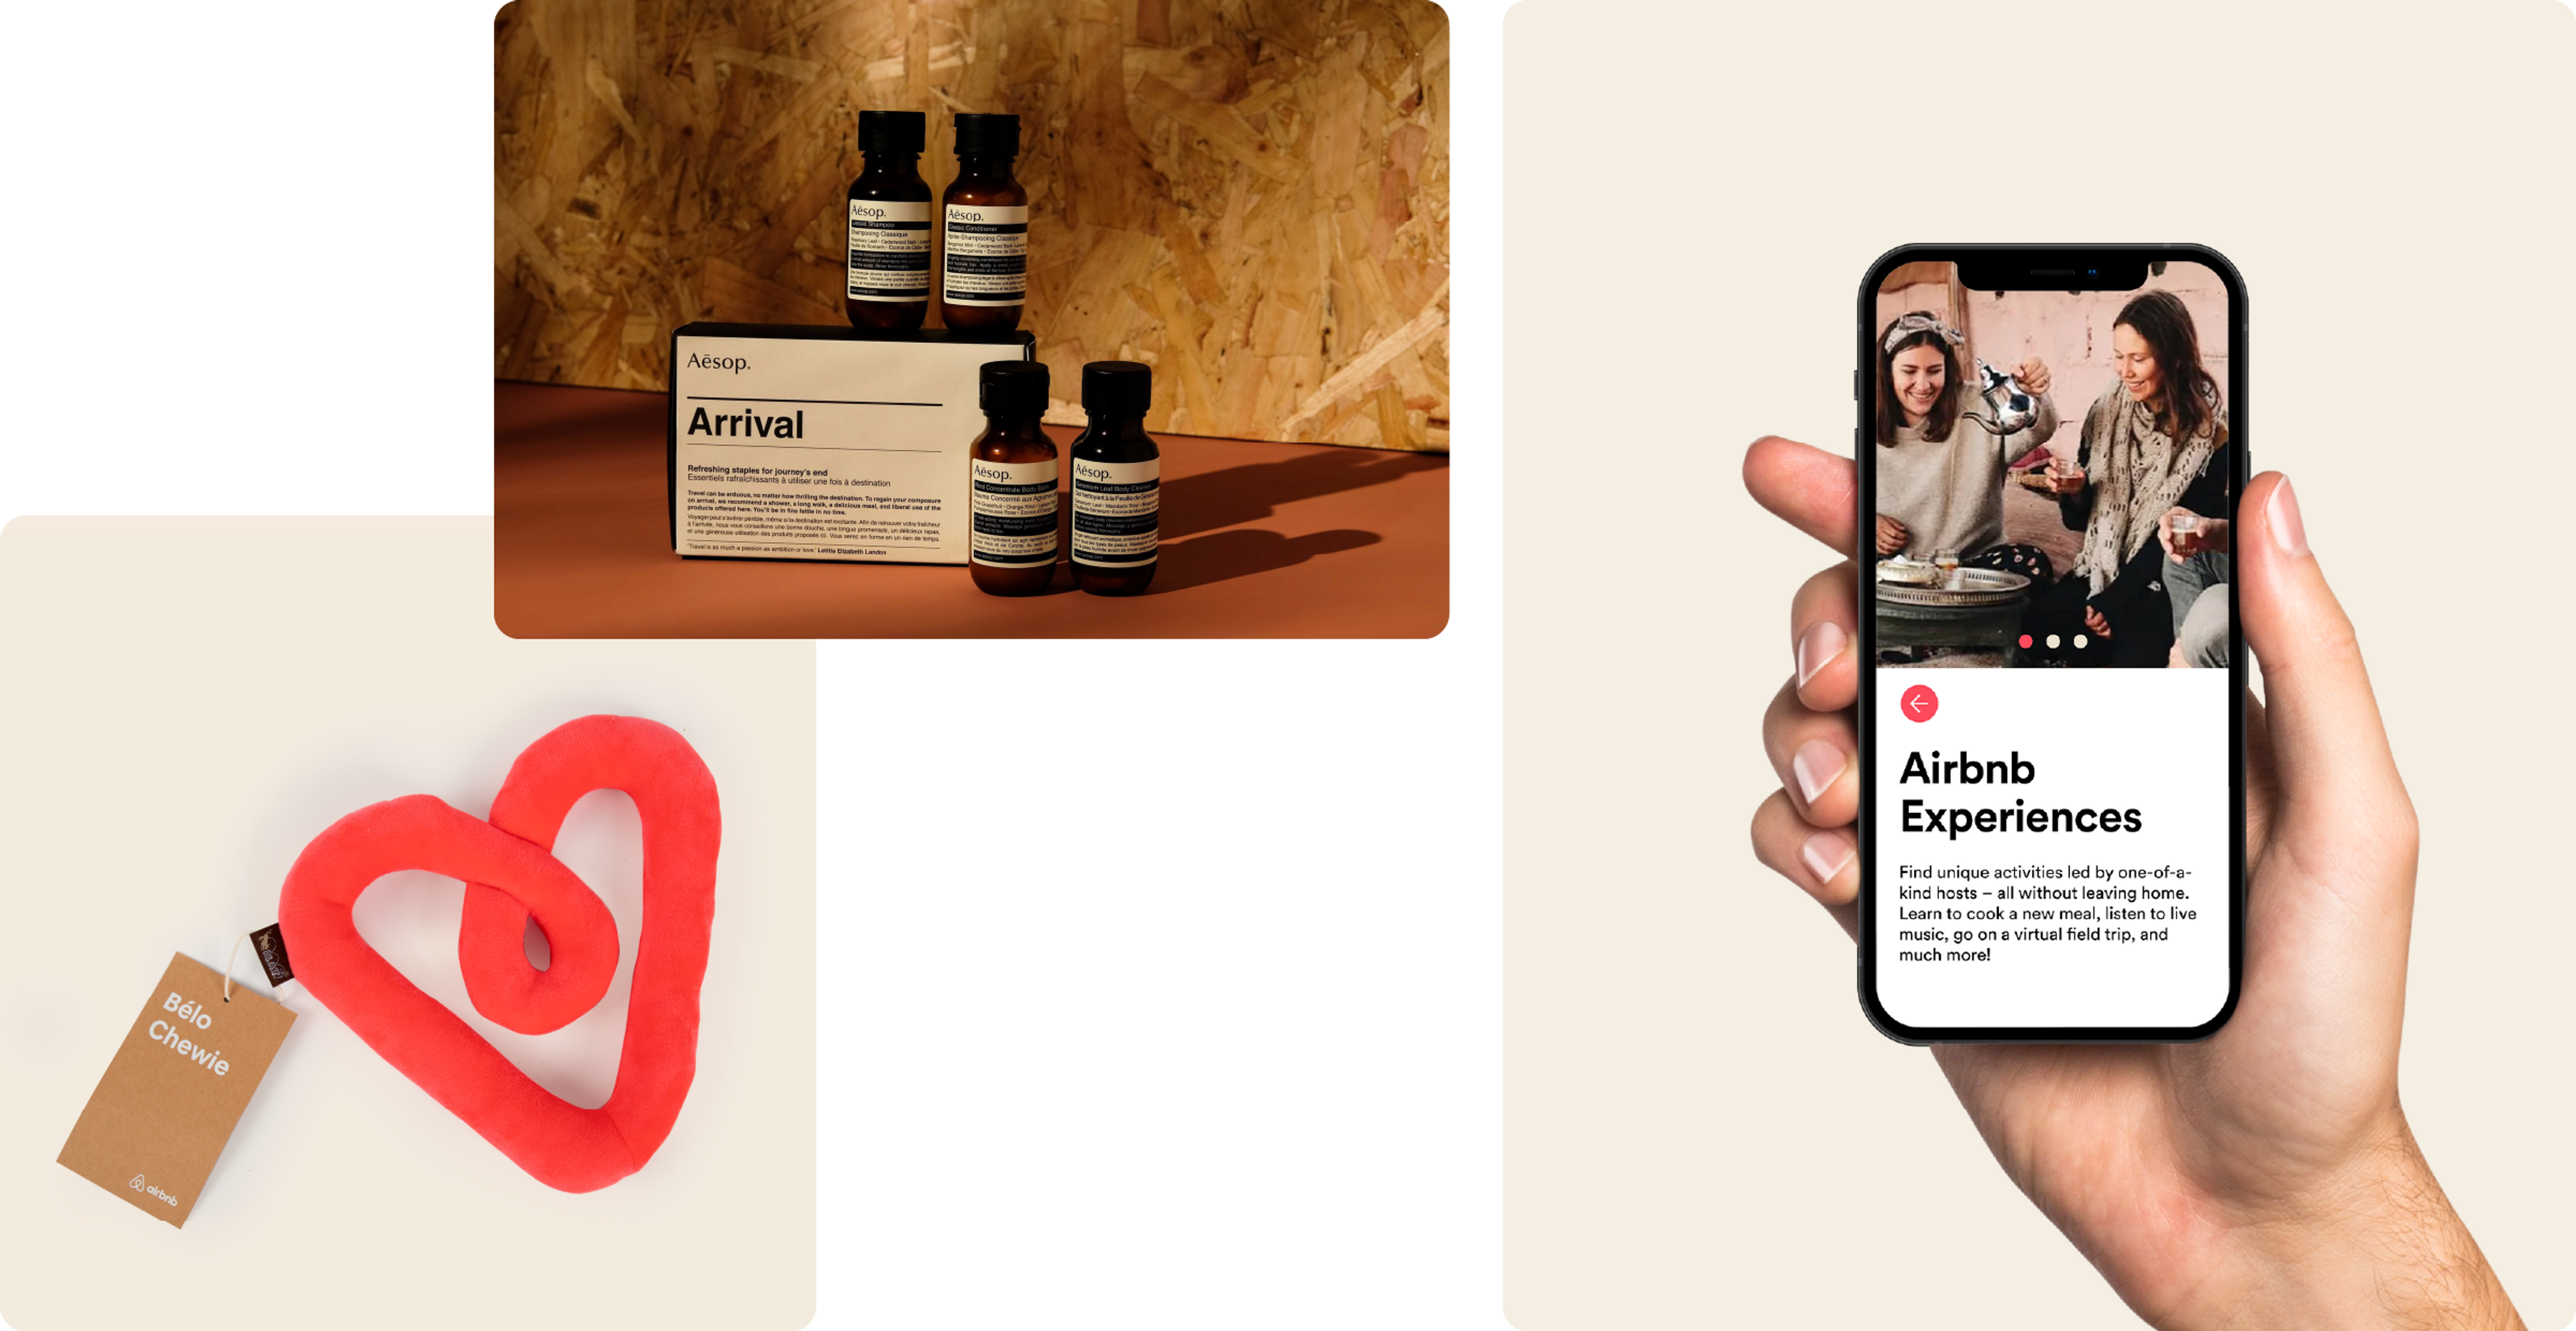 A selection of Airbnb gifts included a branded dog chew toy and a phone showing an Airbnb experience